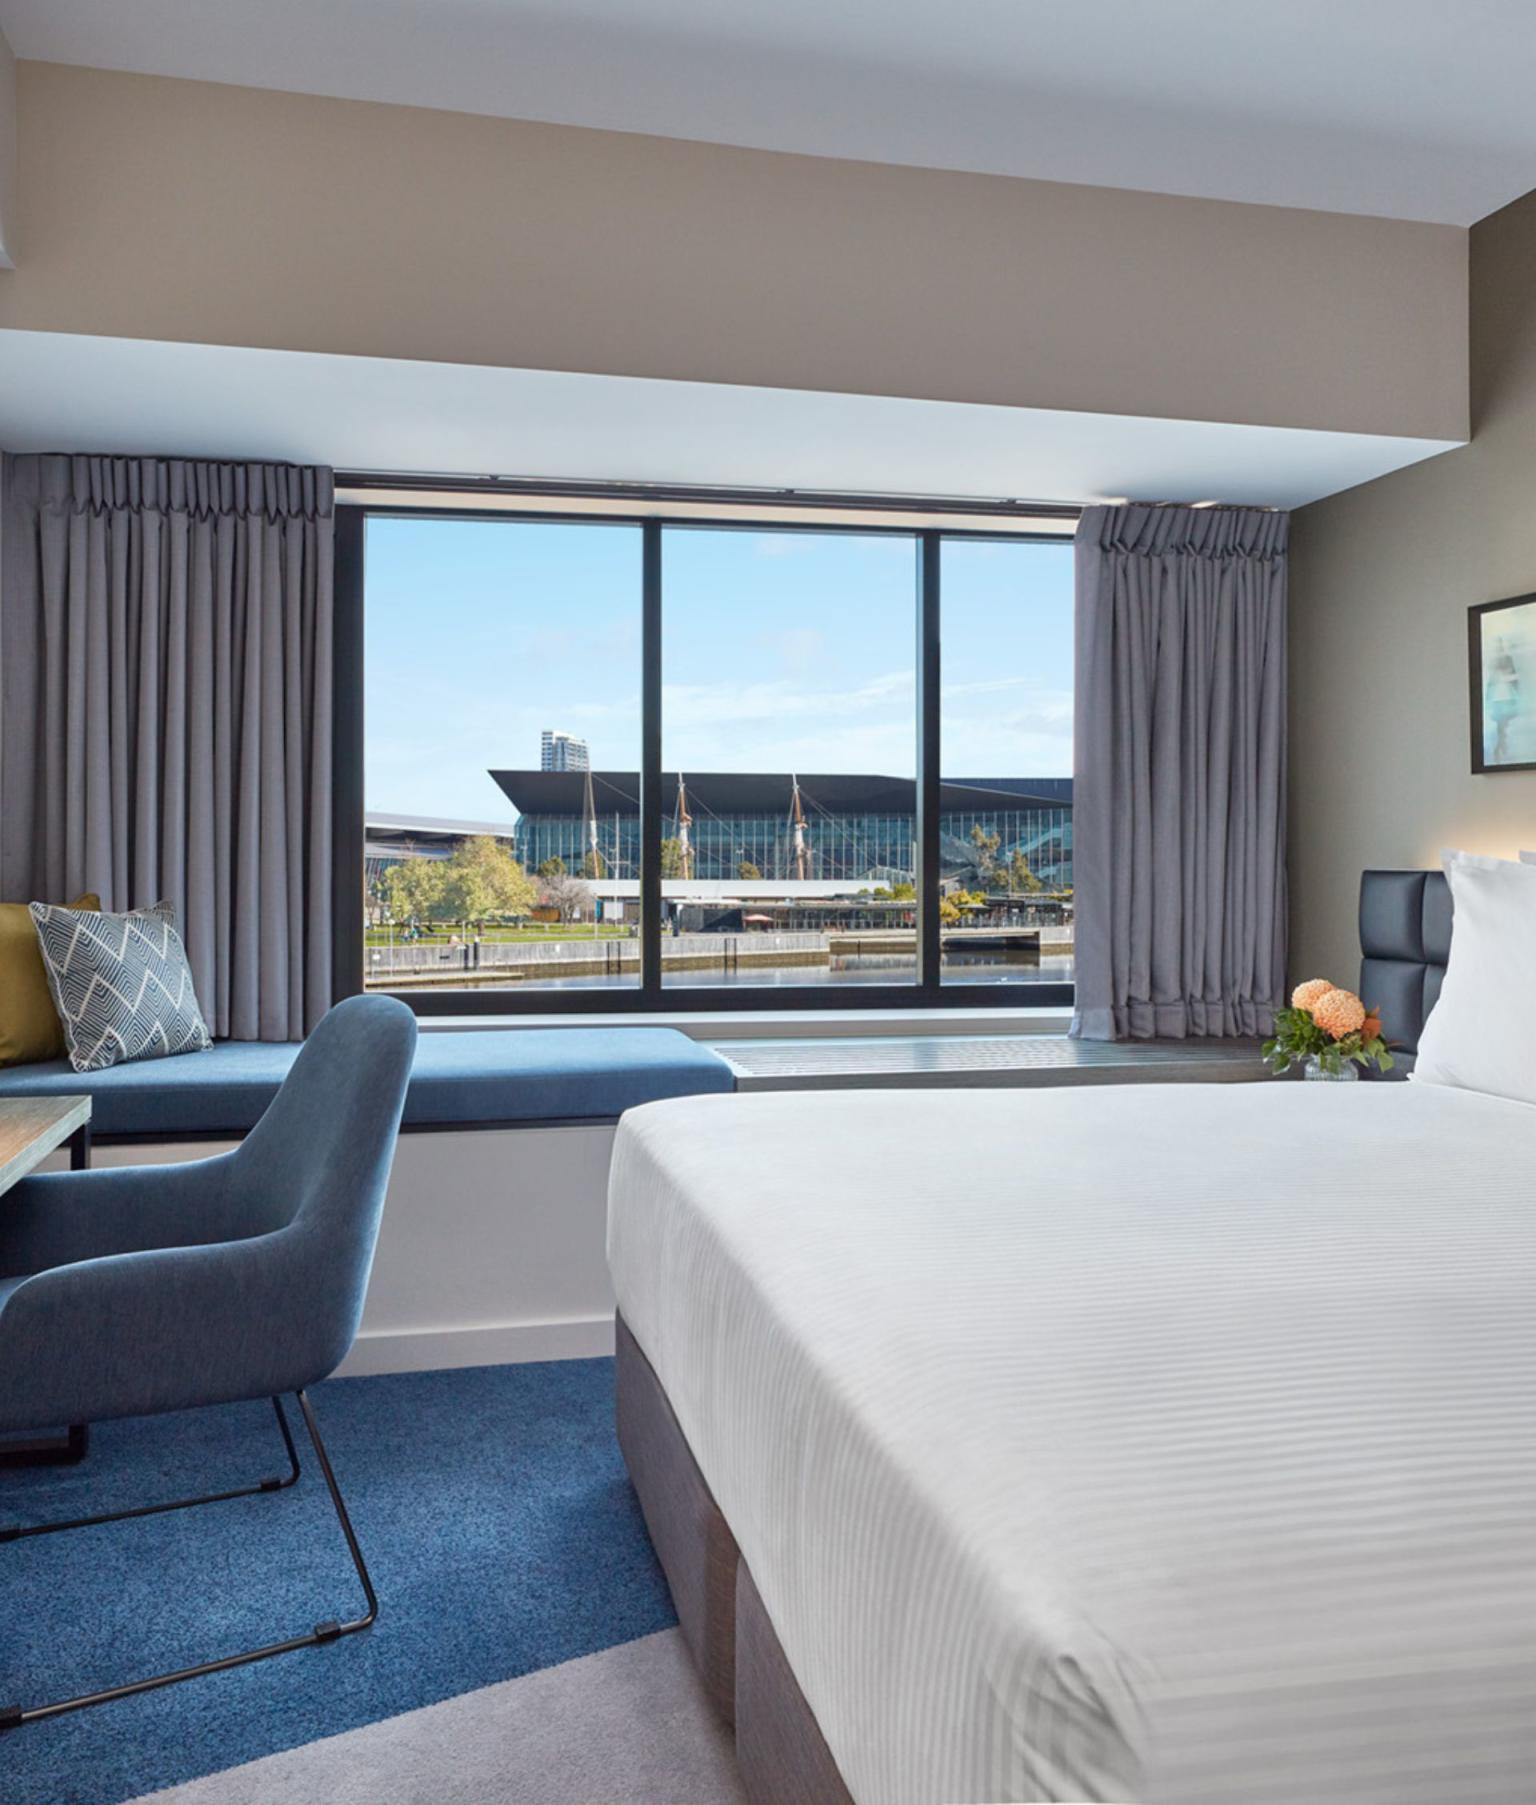 MCEC partners with nearby Melbourne hotels, giving guests flexible accommodation choices tailored to their preferences.